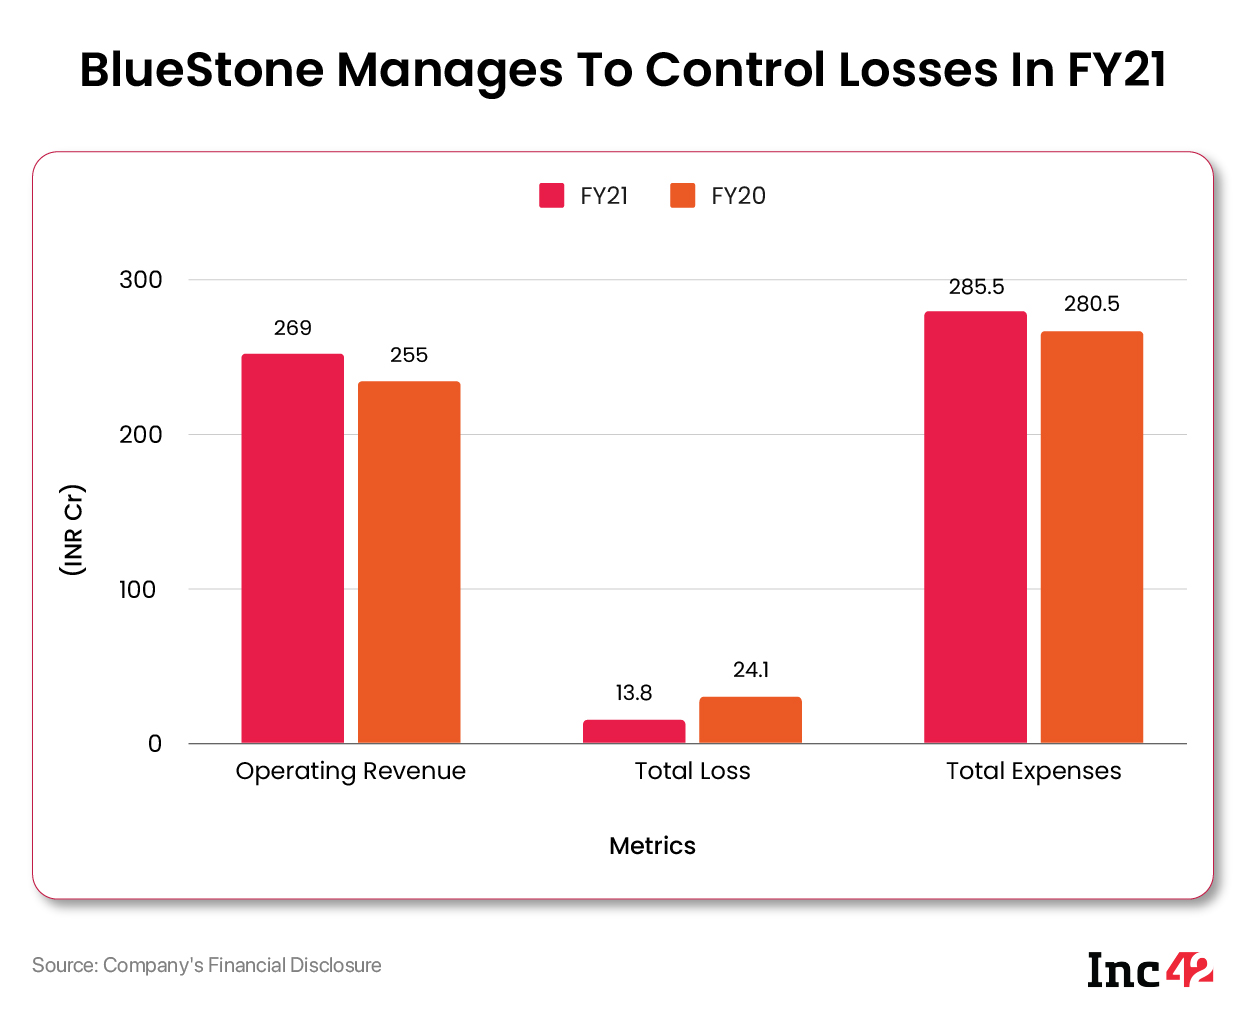 BlueStone Manages To Control Losses In FY21